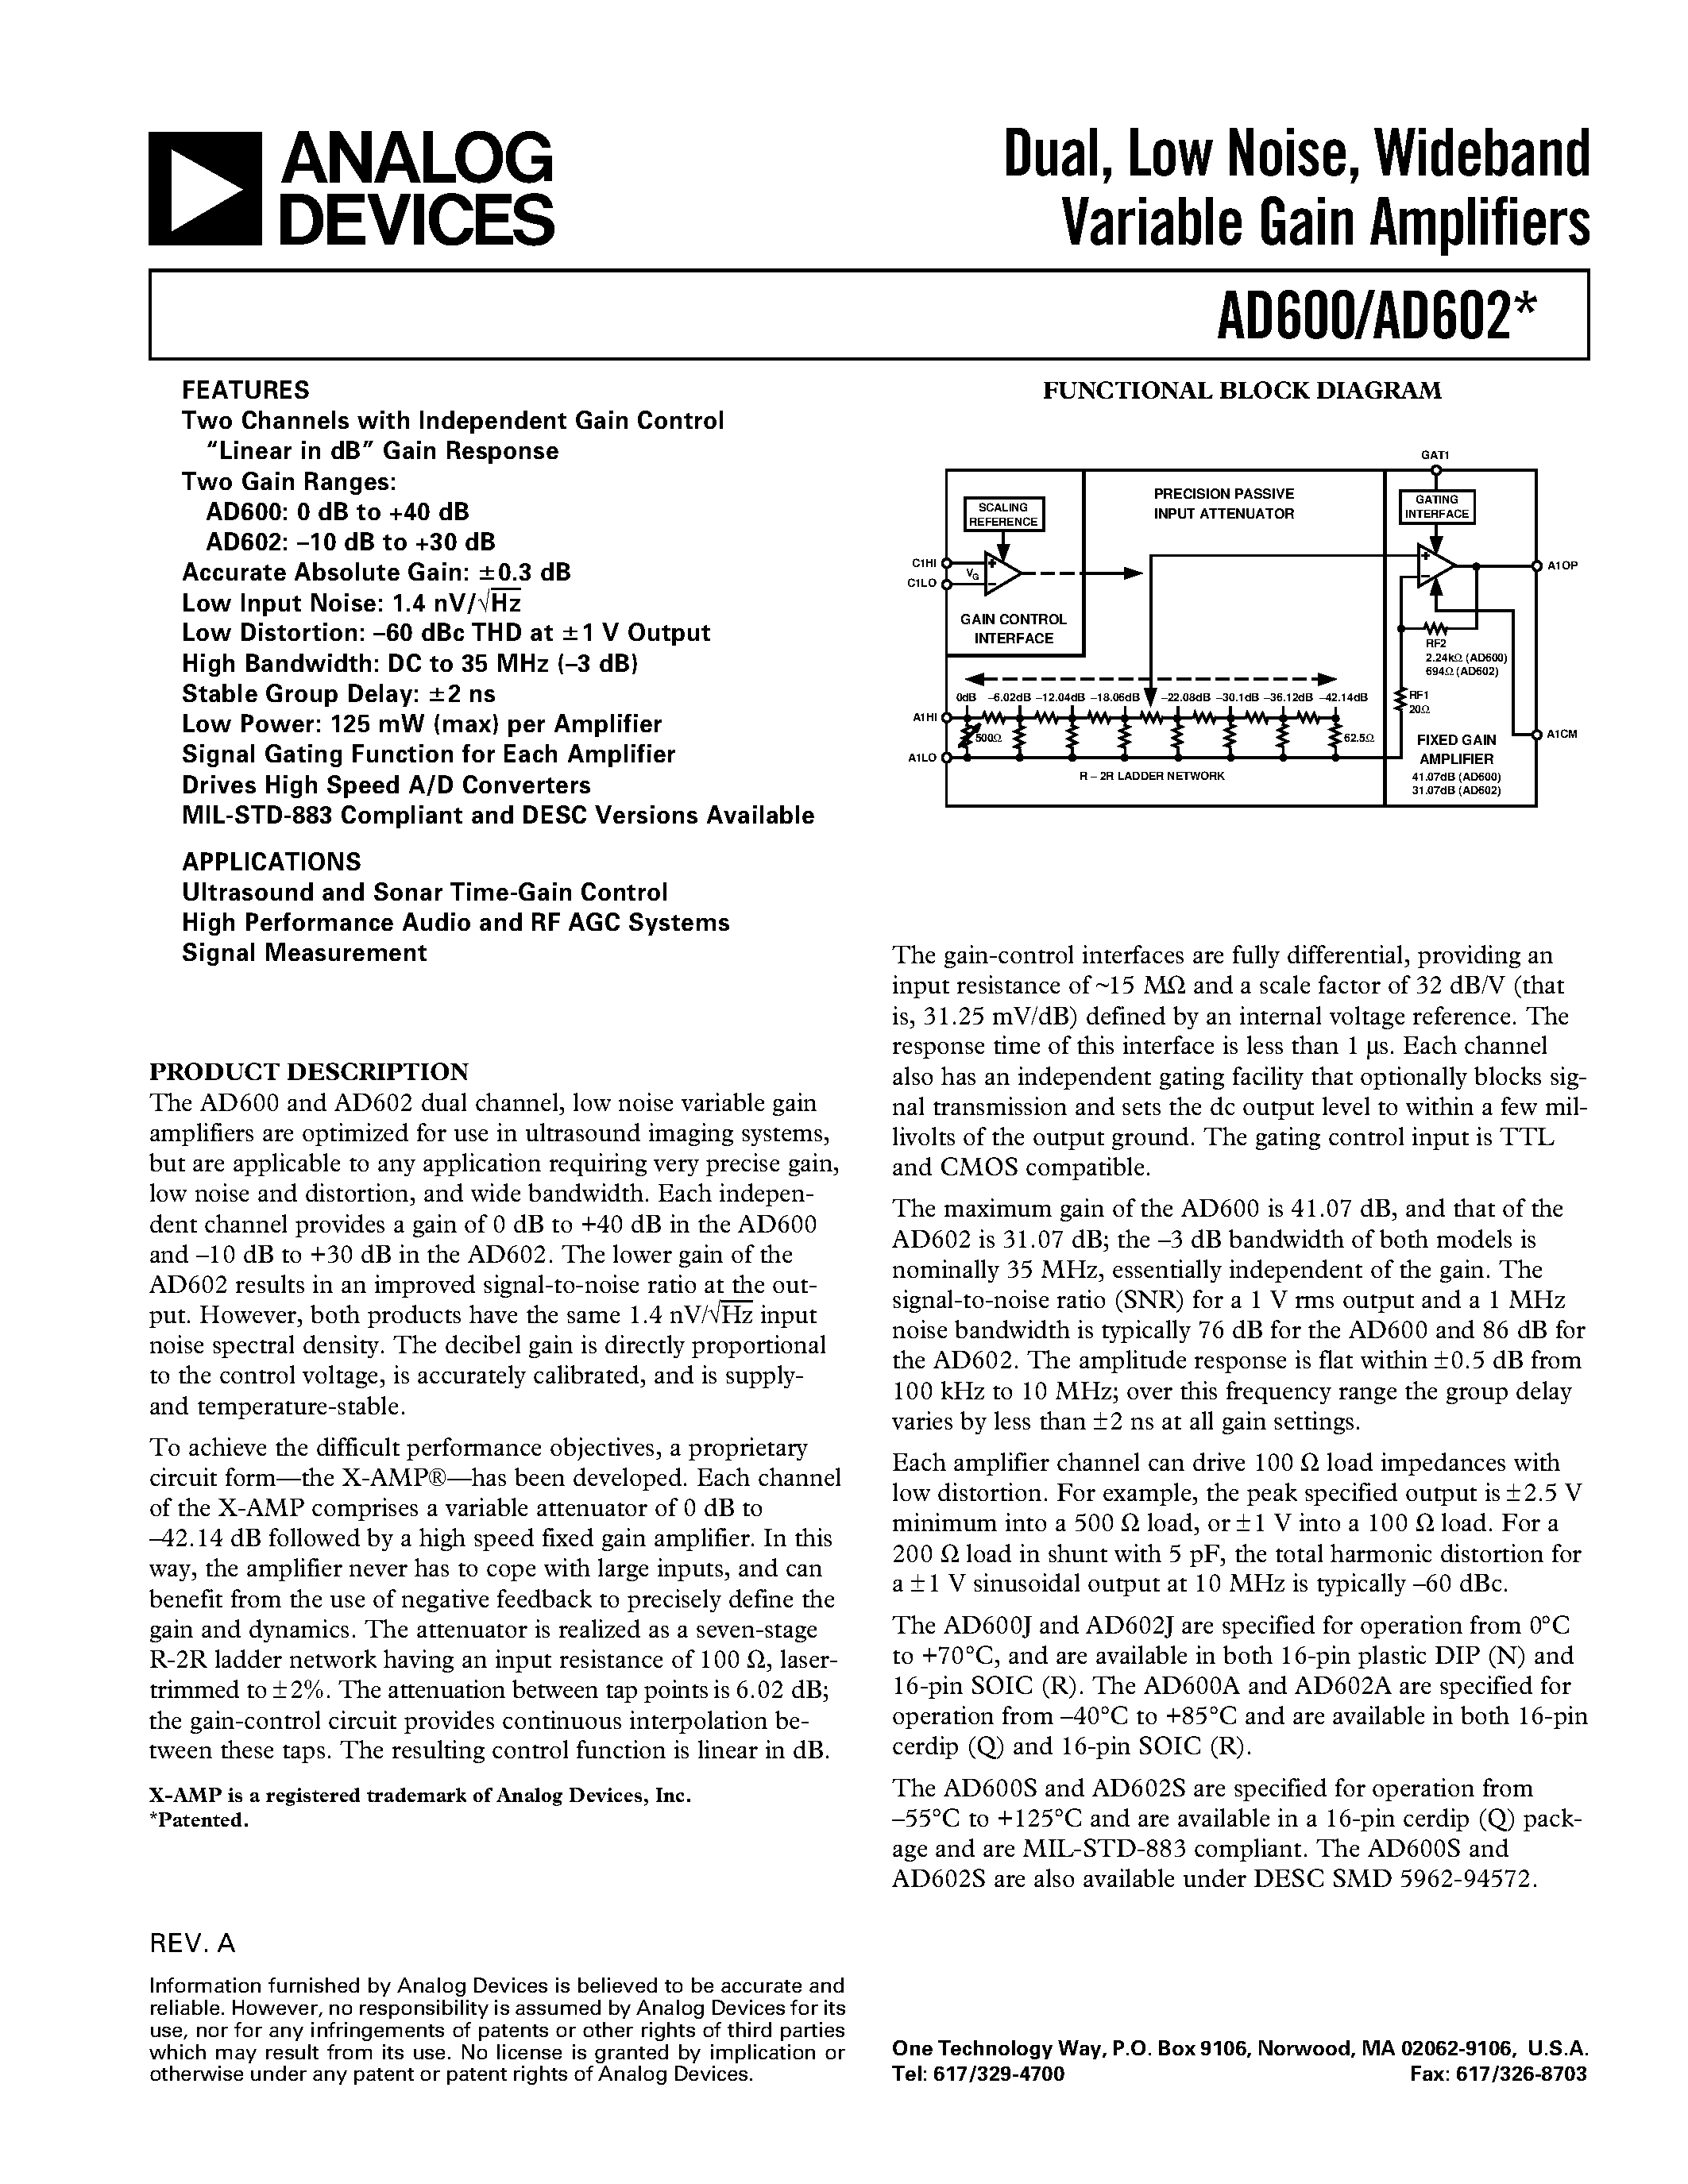 Datasheet AD600AQ - Dual/ Low Noise/ Wideband Variable Gain Amplifiers page 1